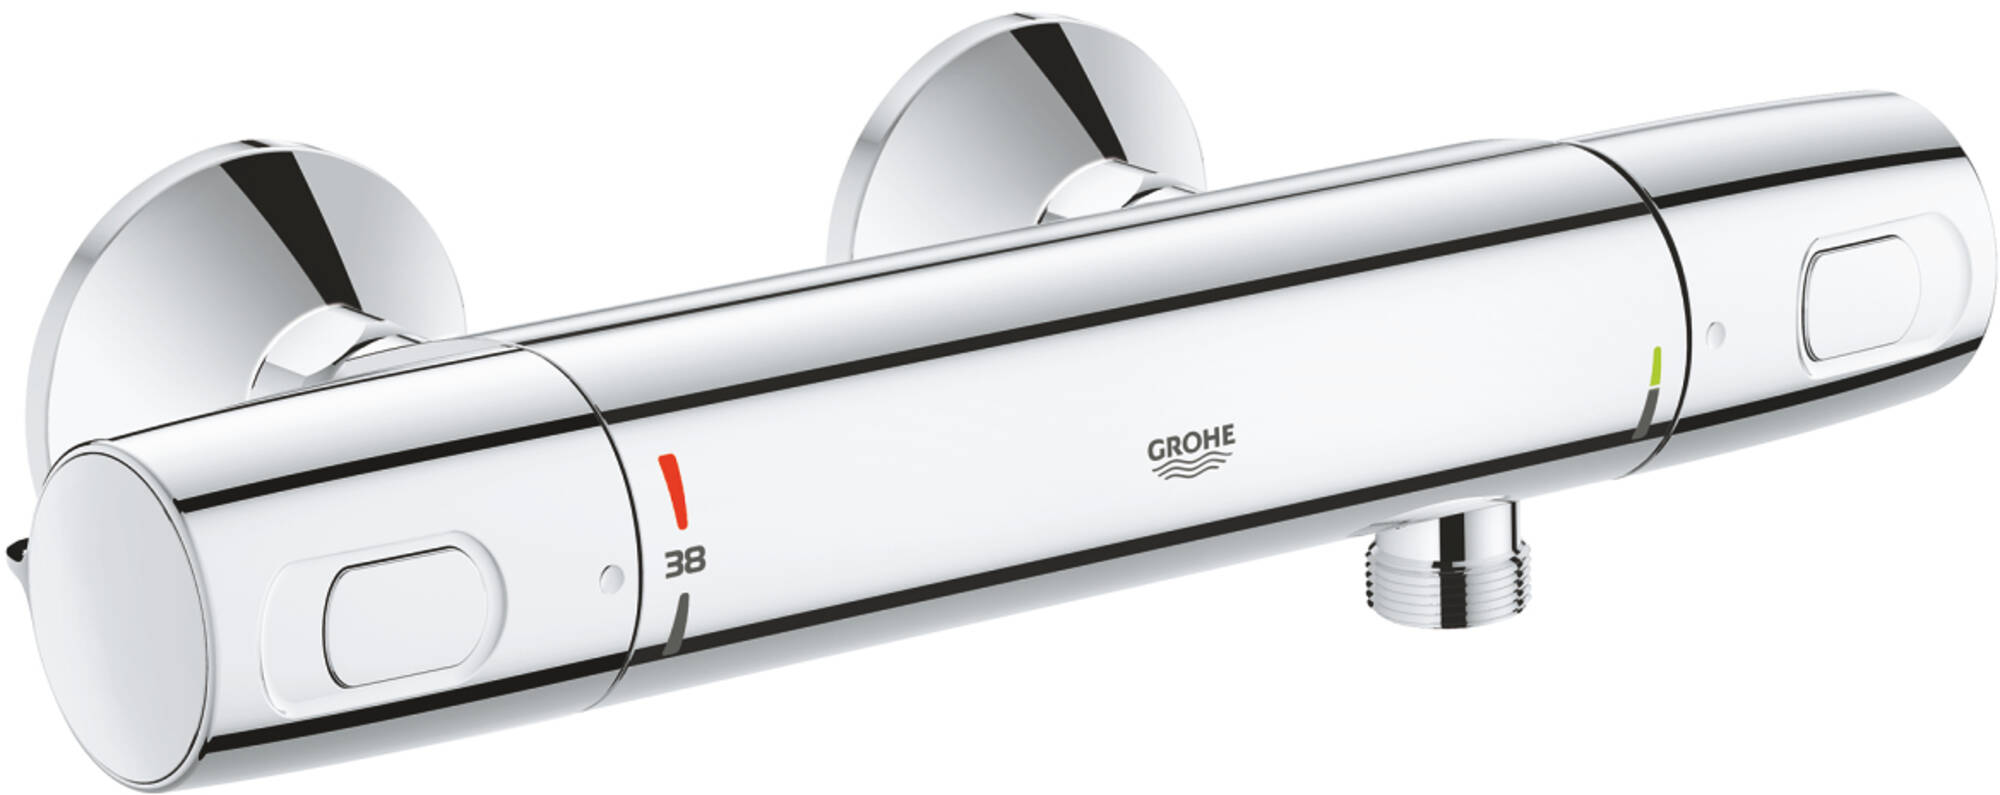 Grohe Precision Trend Douchethermostaat Chroom